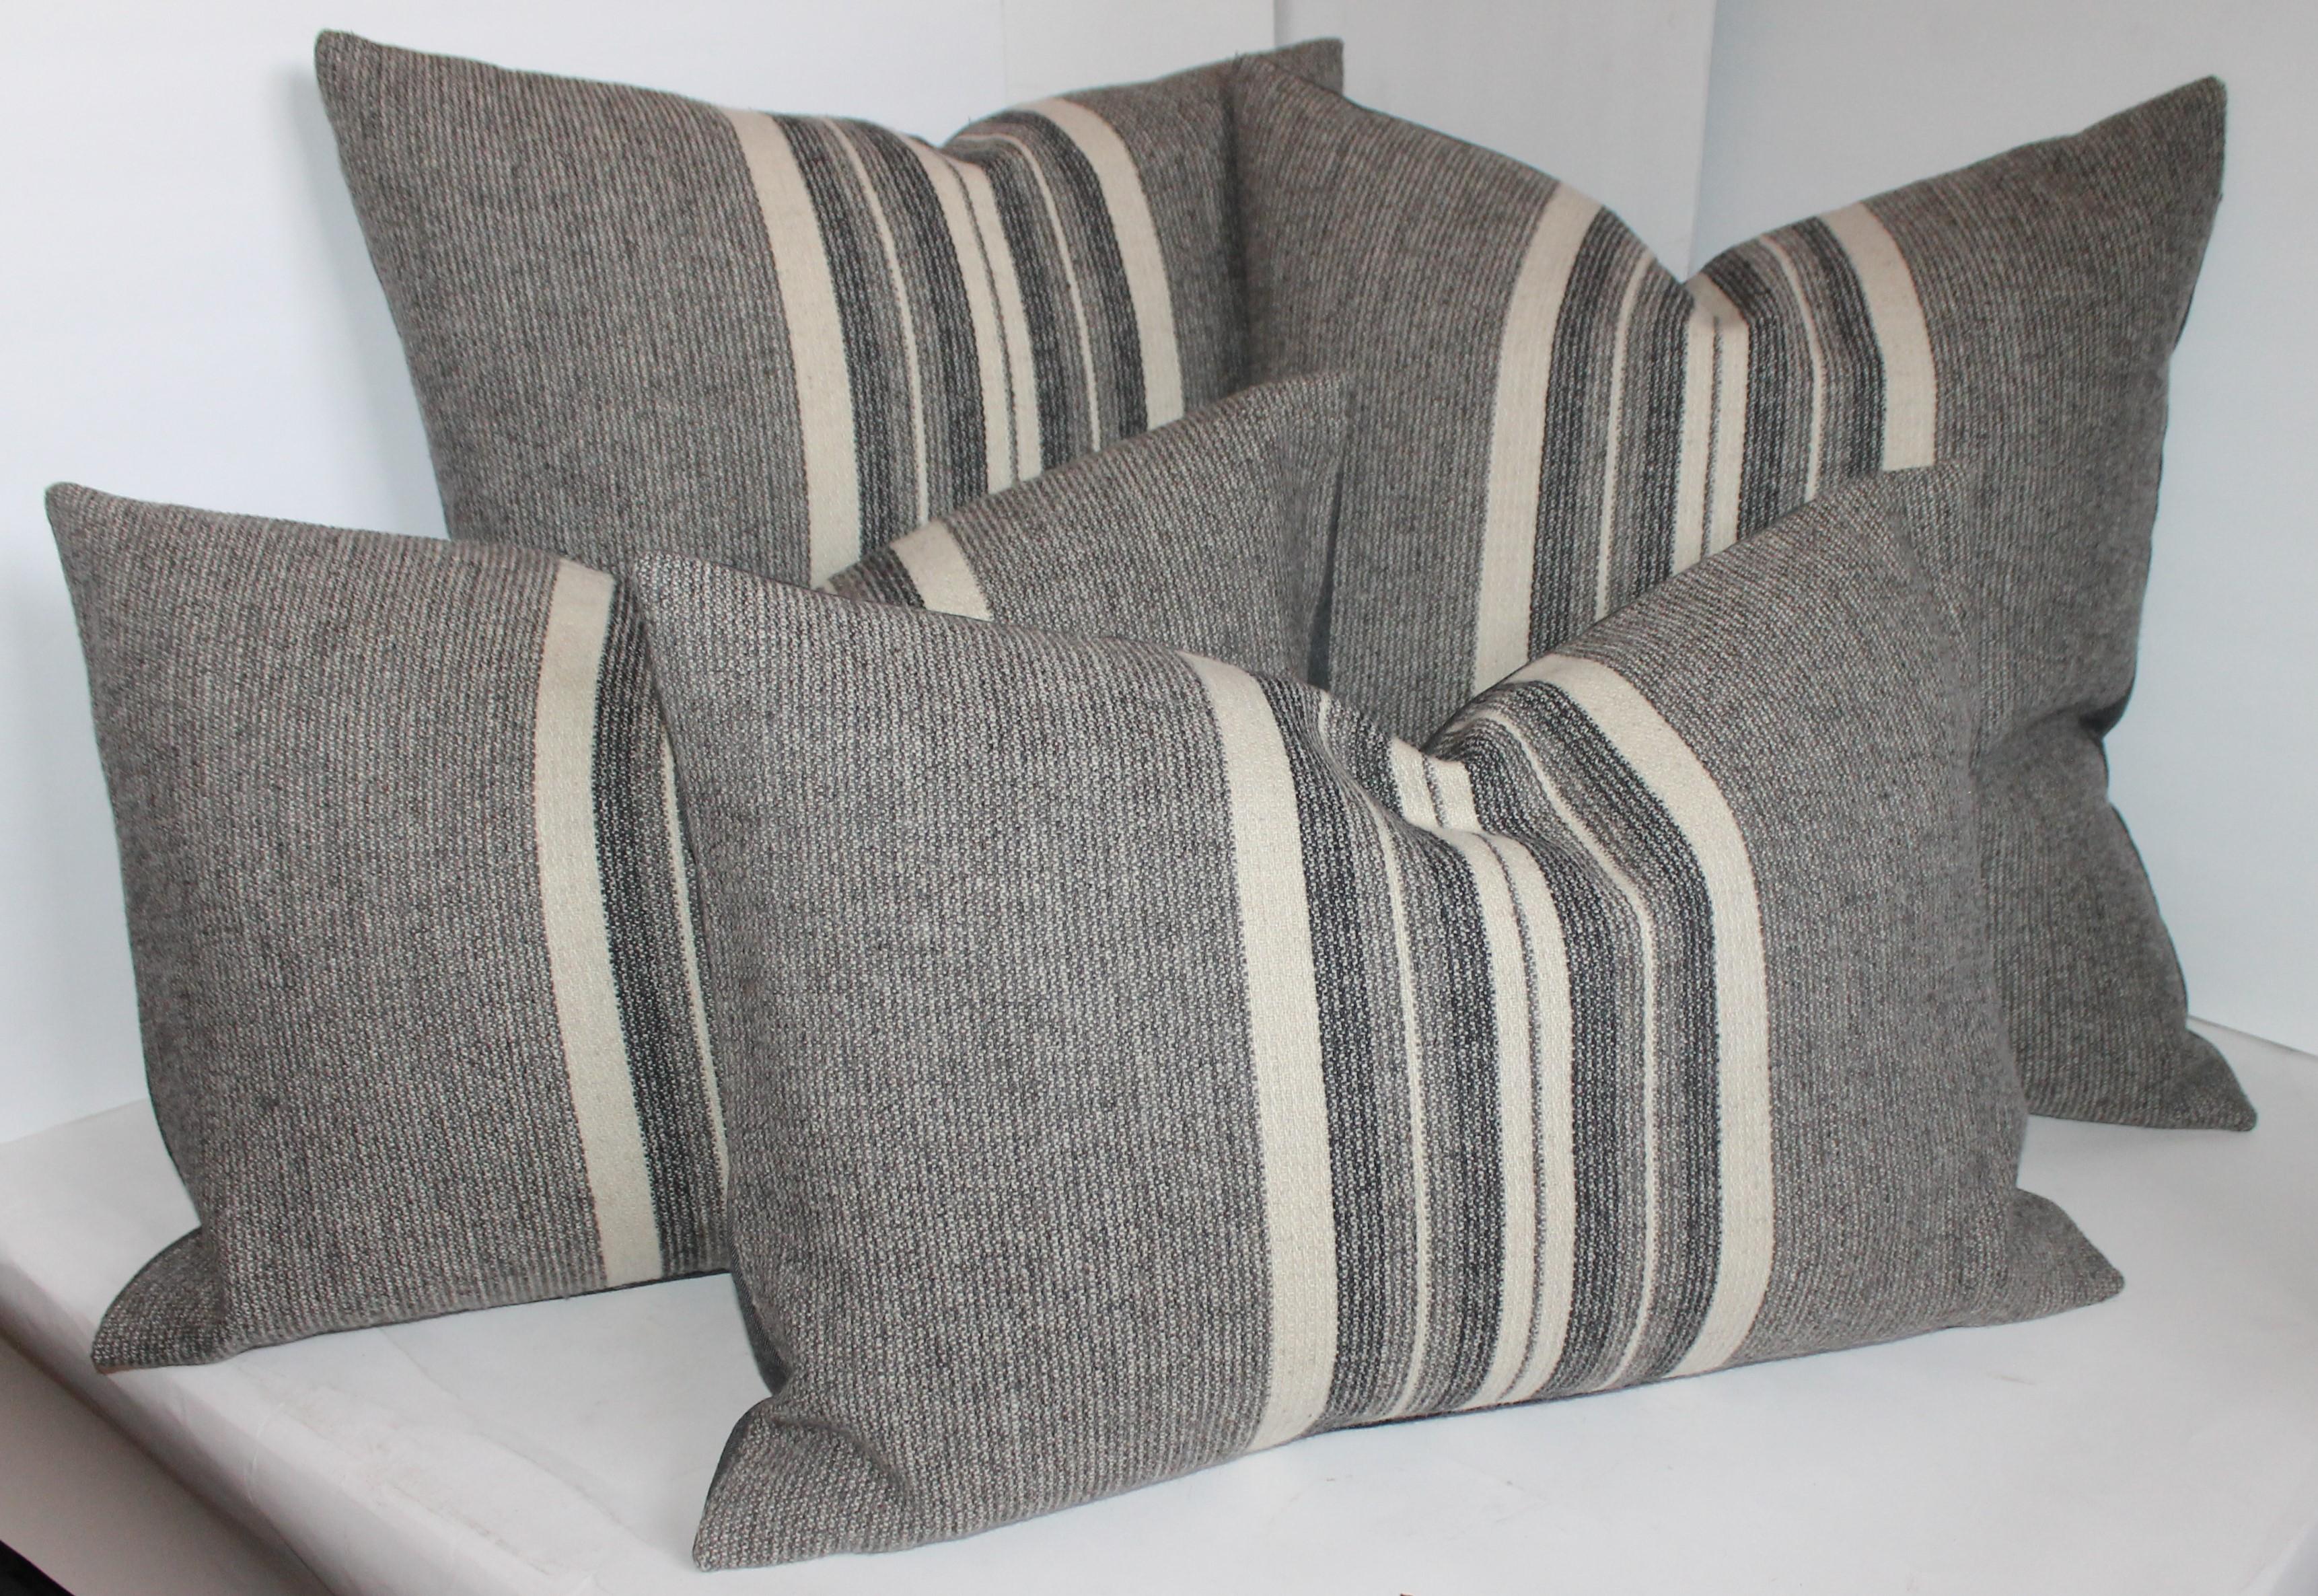 Collection of two different size pillows in grey flannel wool woven fabric. The backings are in grey cotton linen.
The larger pair are 22 x 22 and the kidney pillows are 15 x 24. Sold as a group. All in fine condition and down and feather fill.